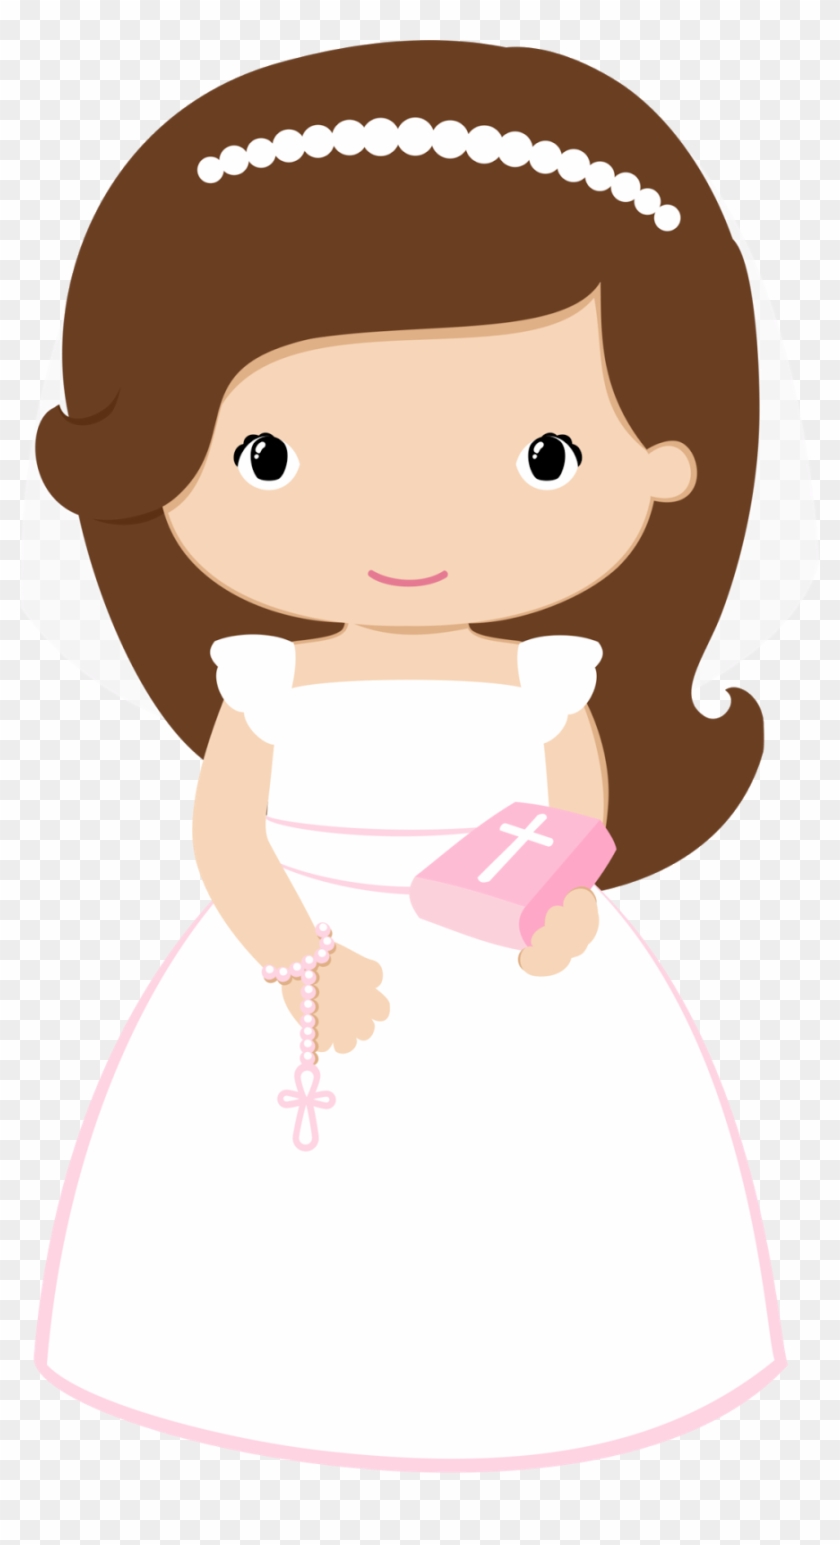 Girls In Pink For Their First Communion - Girl First Communion Clipart #261099